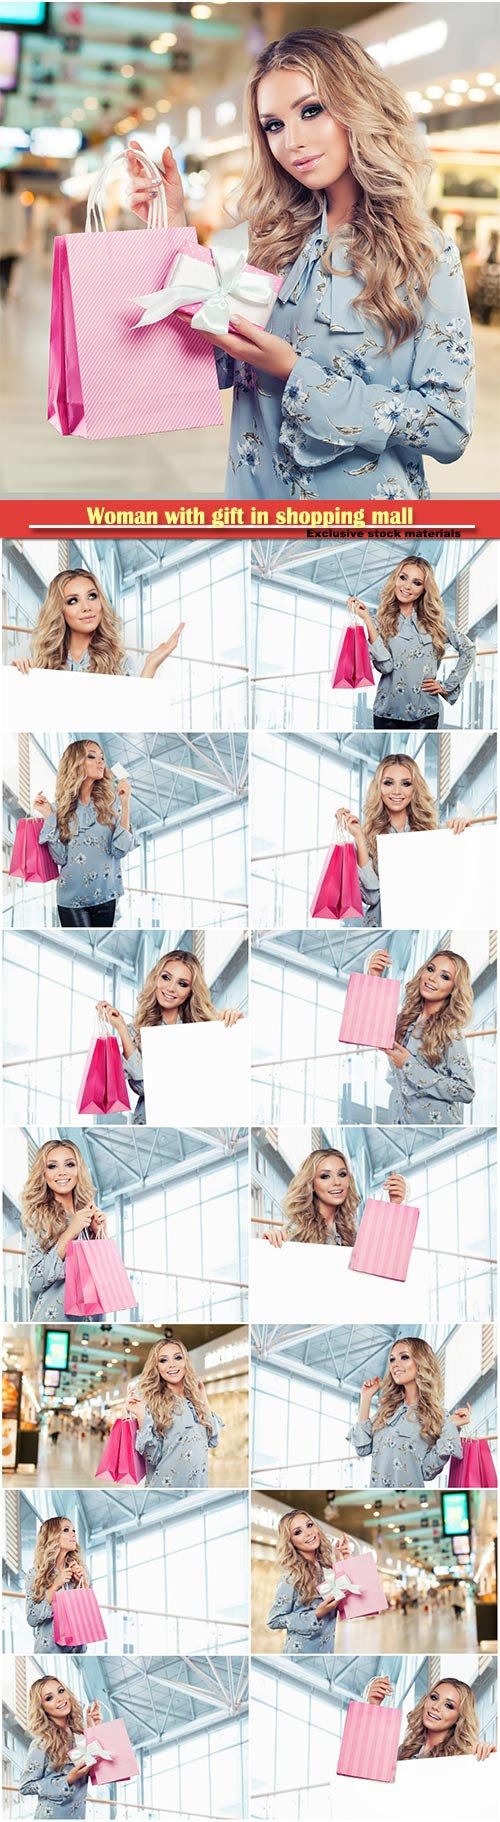 Happy beautiful woman fashion model with gift in shopping mall